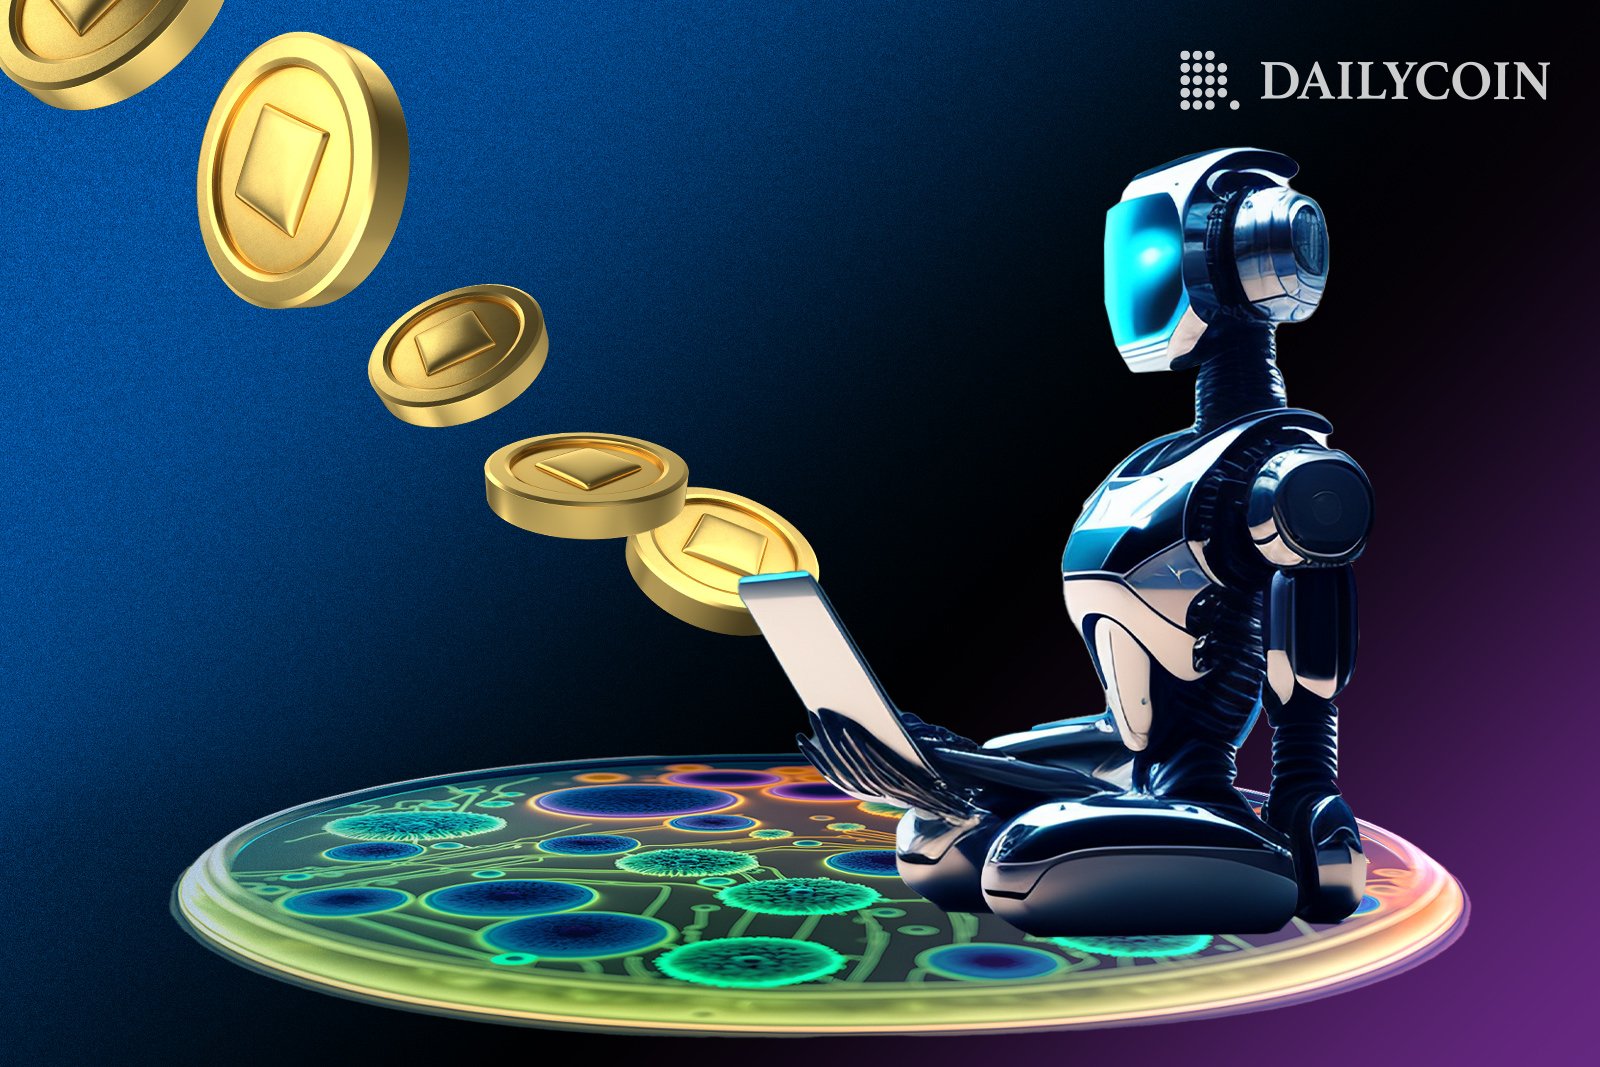 Robot sitting on a platform reading a notepad next to floating crypto coins.